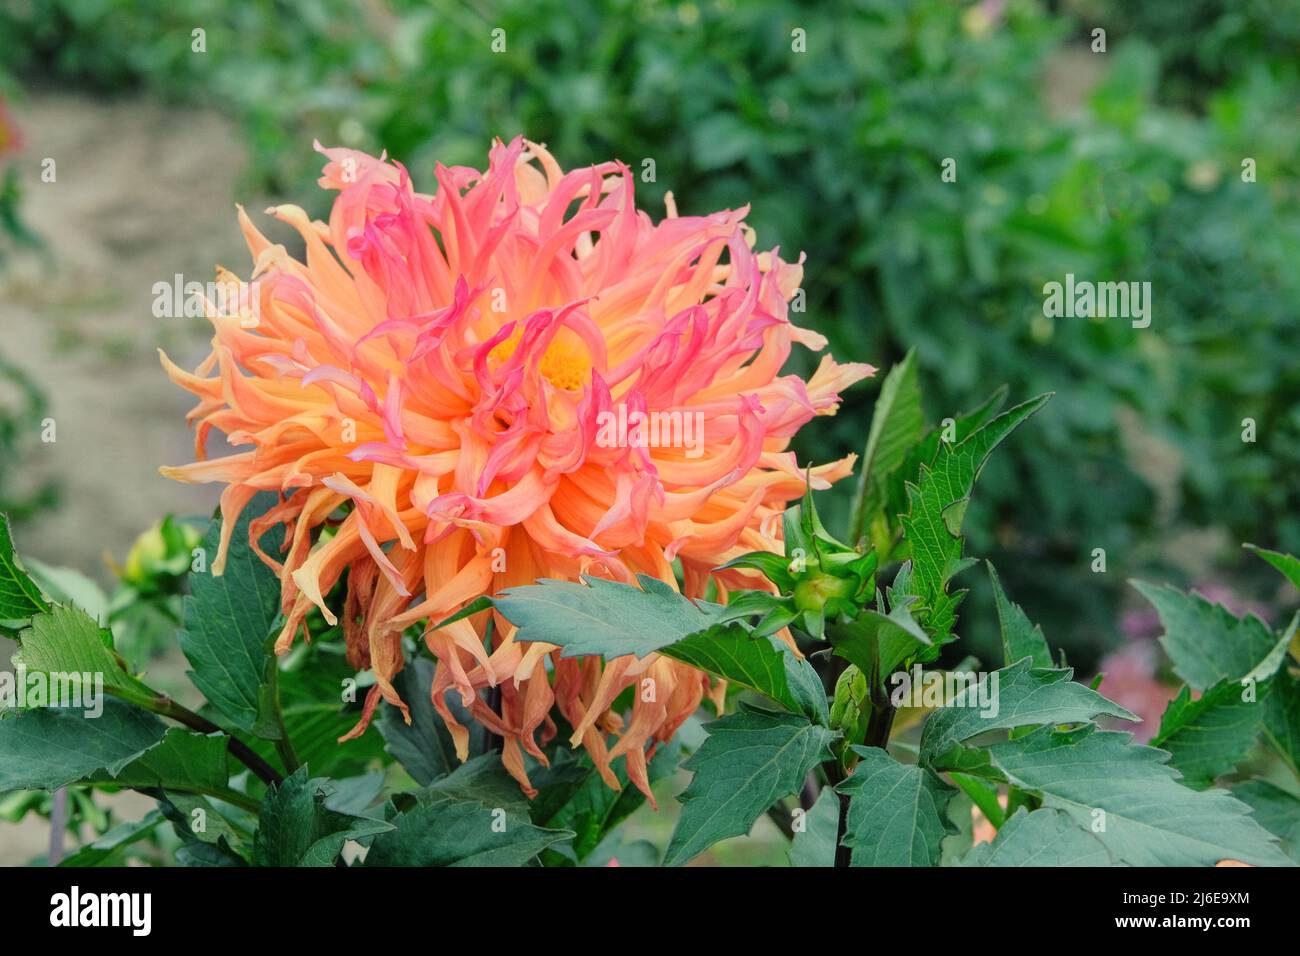 Dahilia in gardening nursery. Natural vibrant blooming background. Water pipe flower. Closeup. Stock Photo